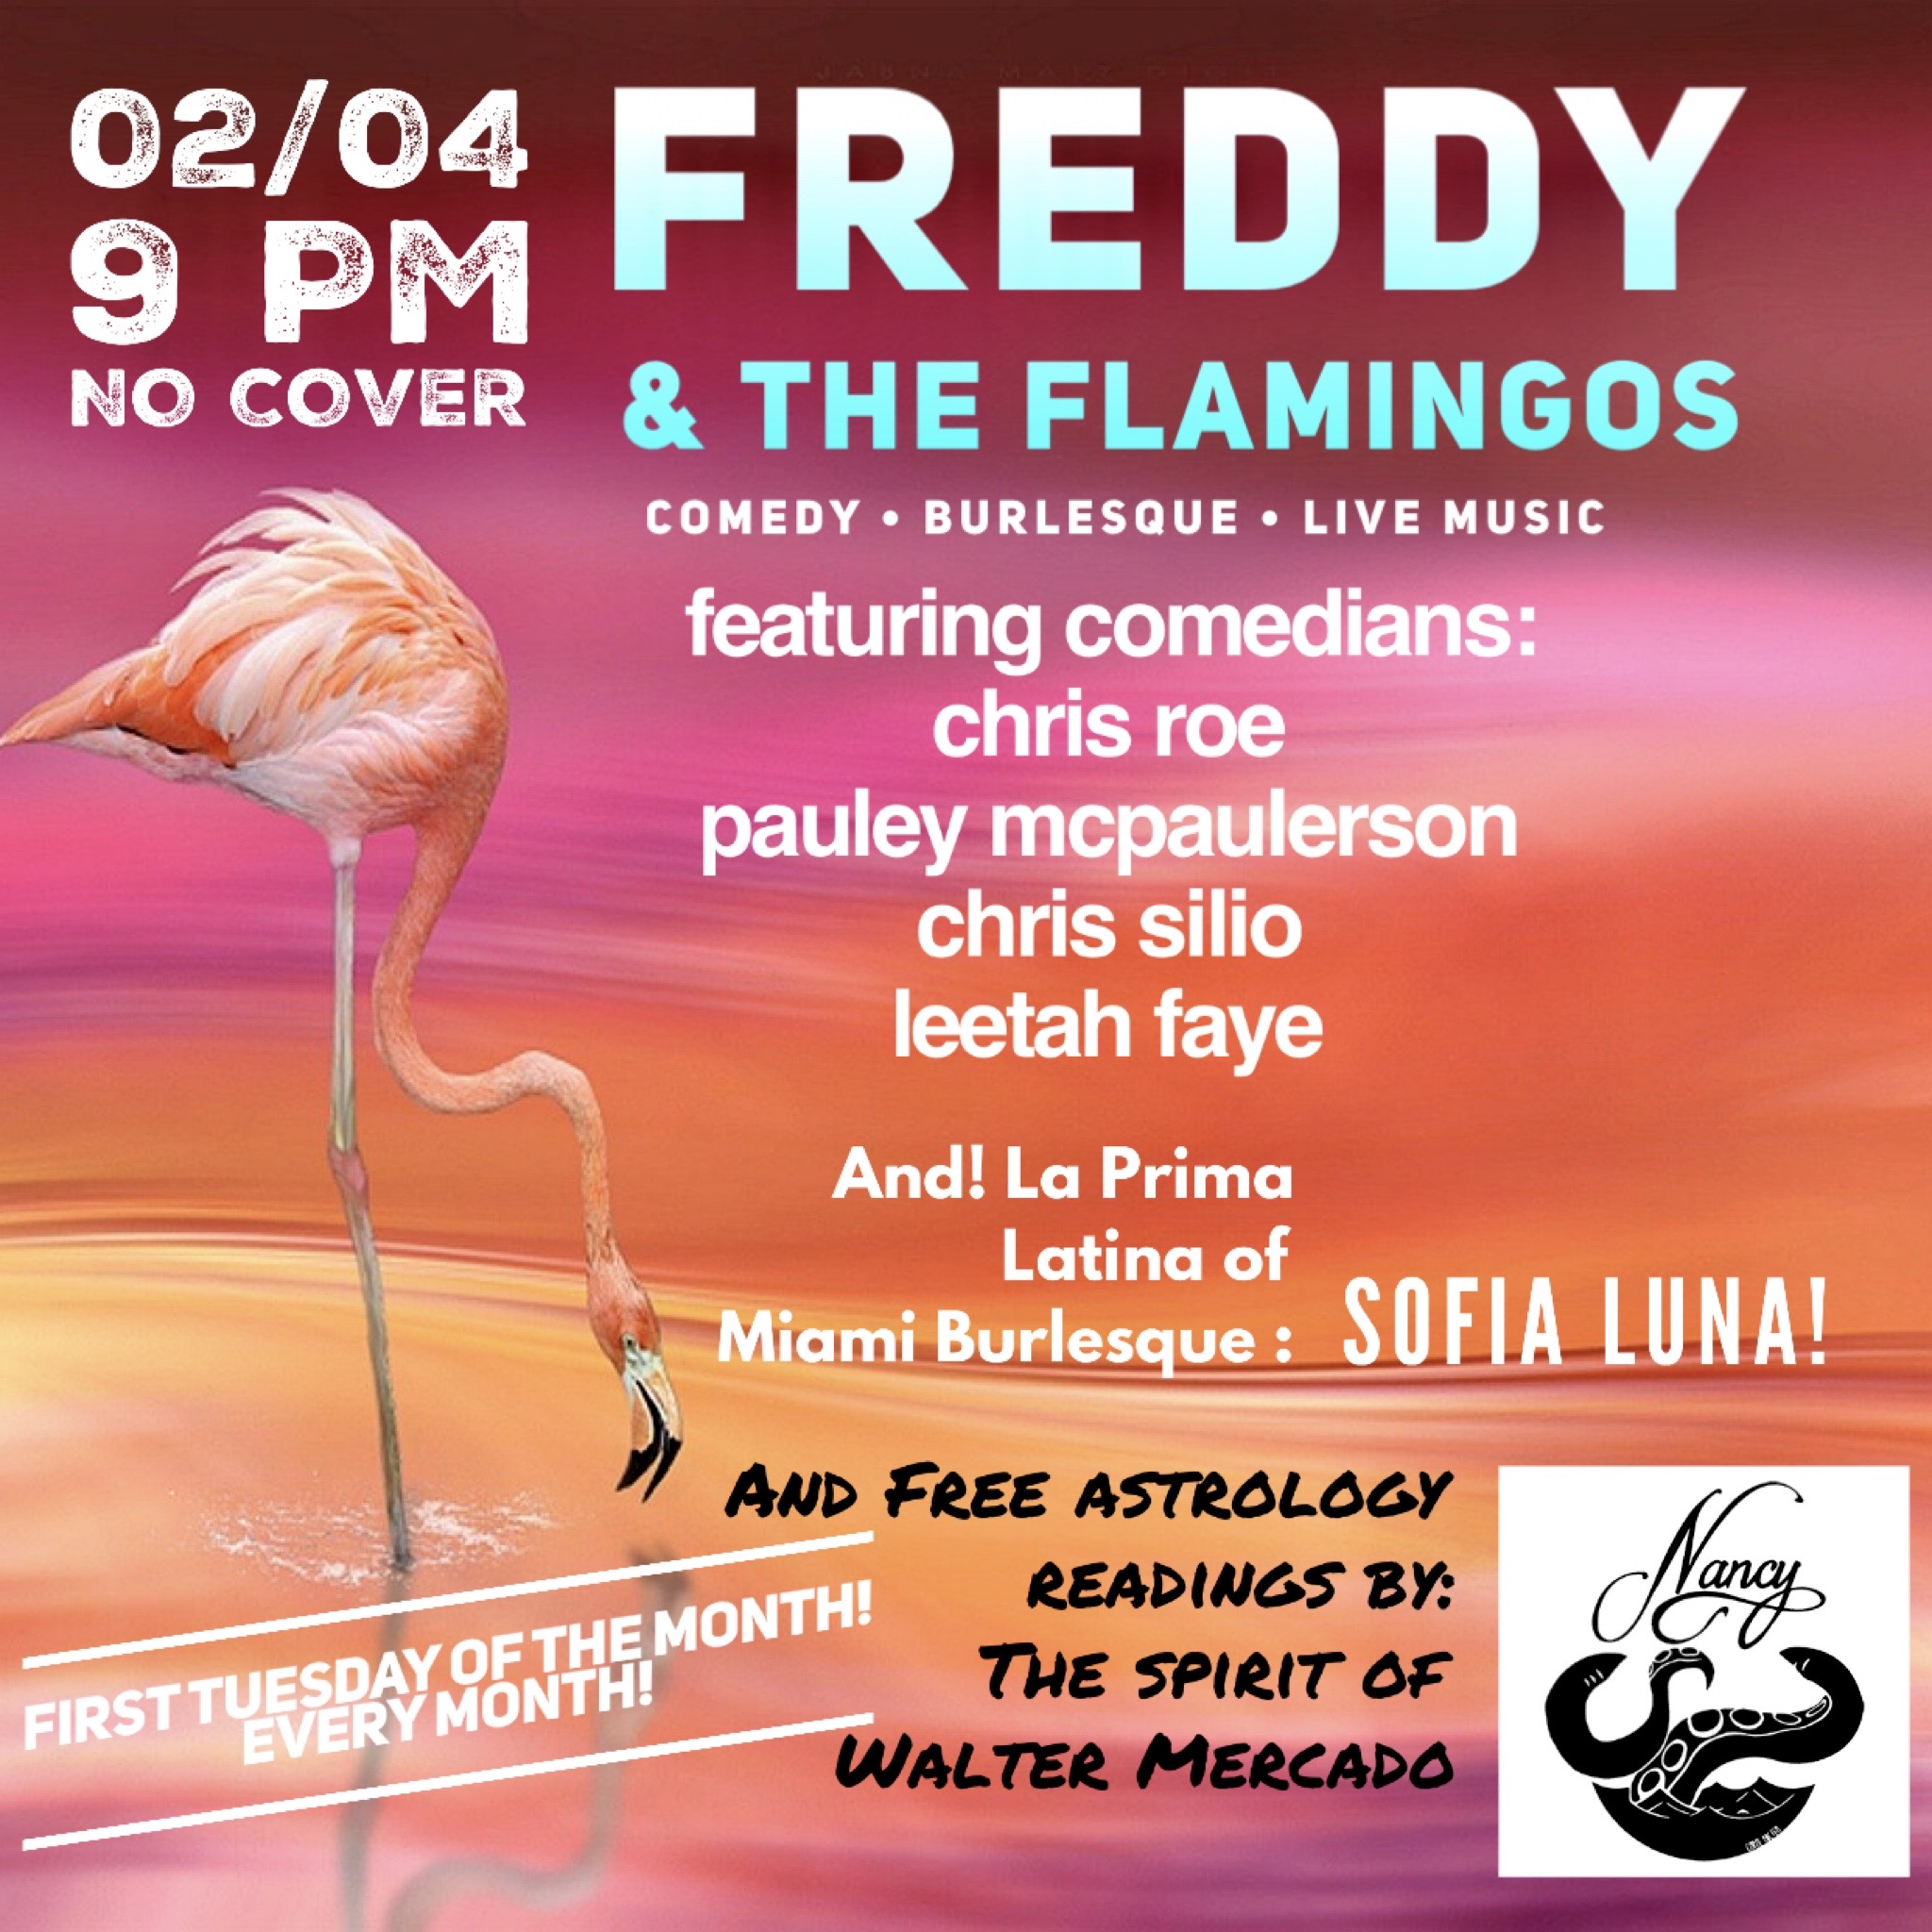 Freddy & The Flamingos! Comedy! Live Music! Variety Show! at Bar Nancy